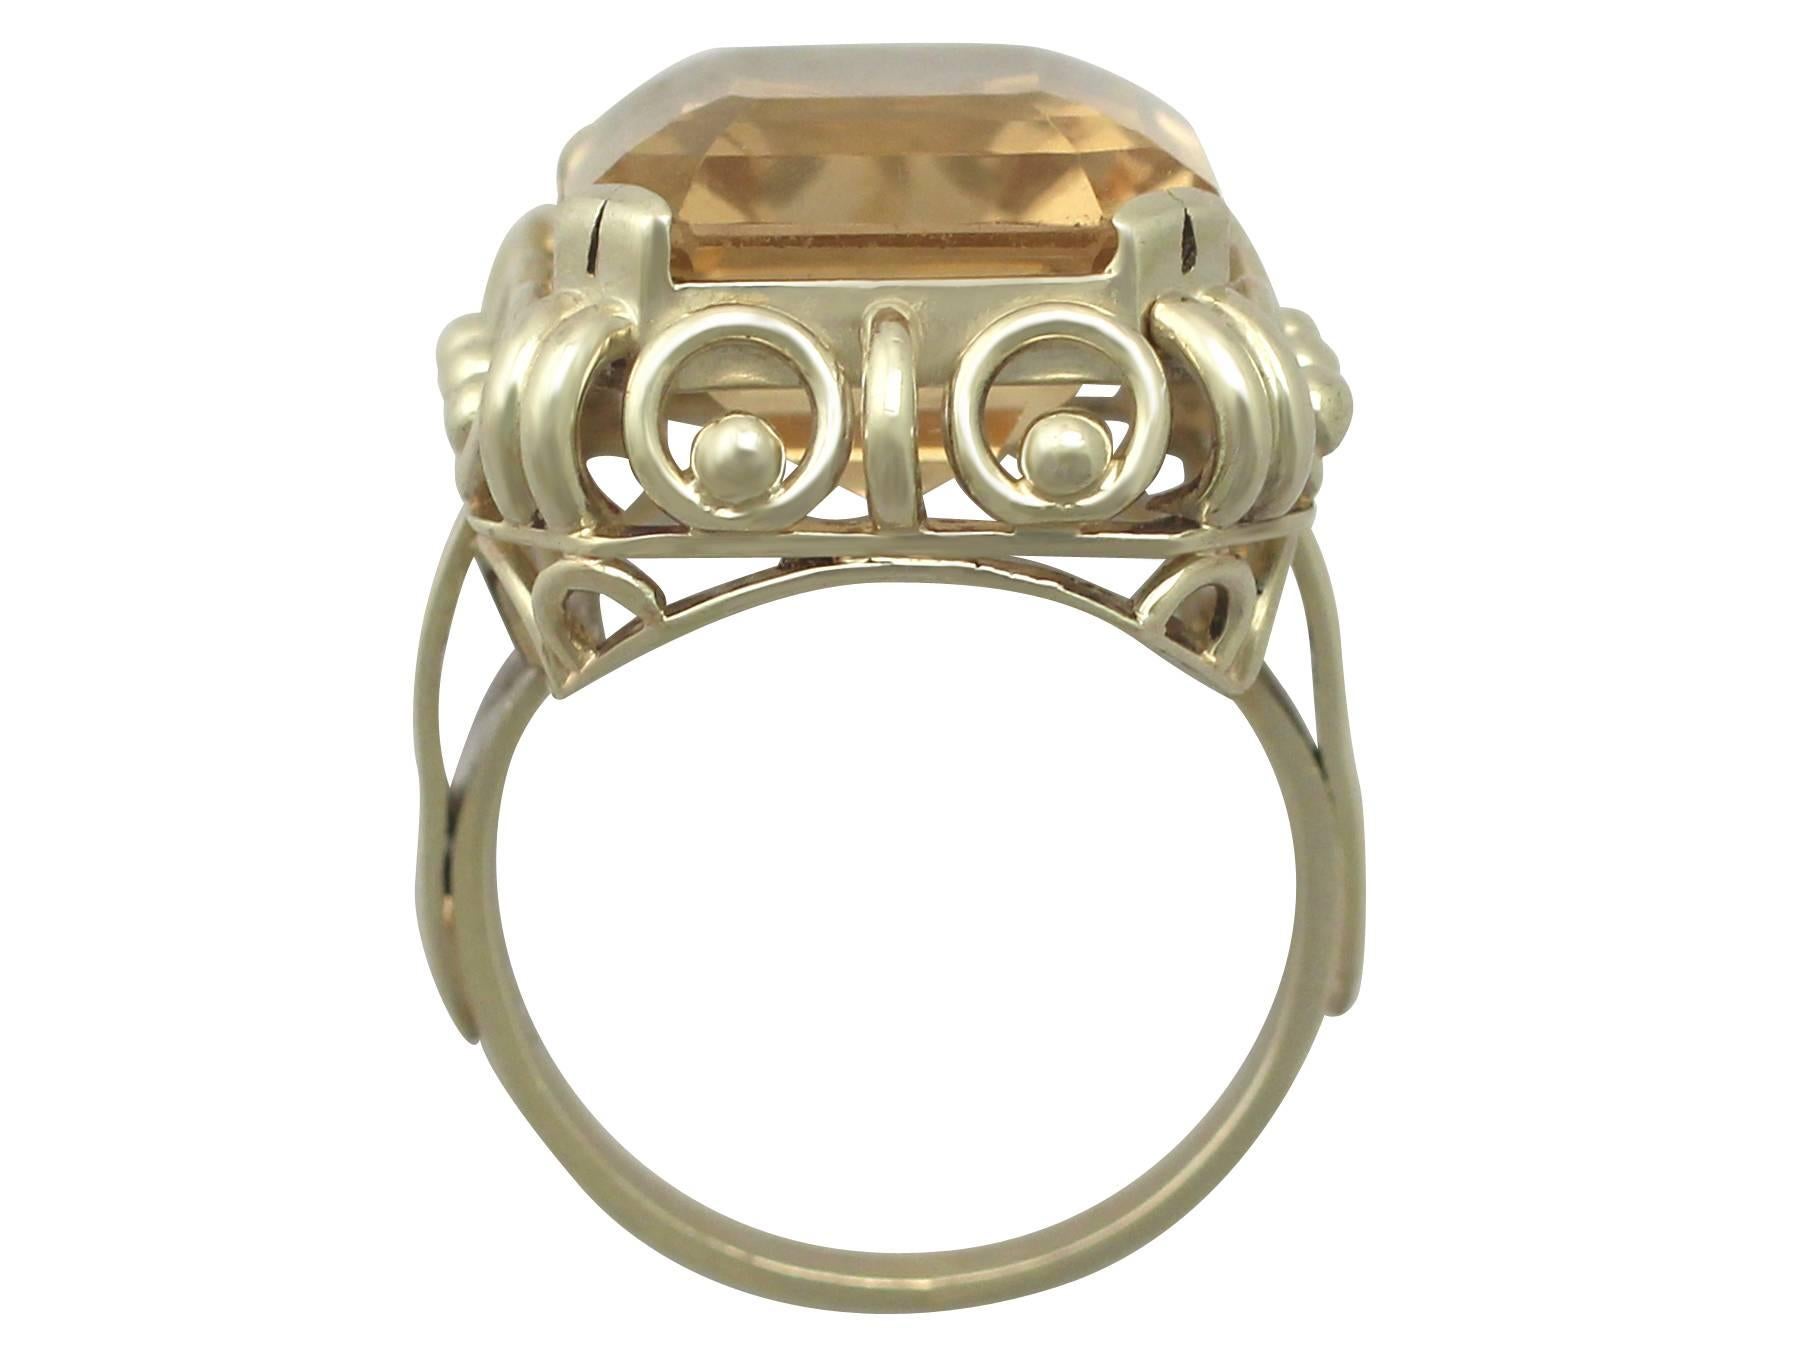 This fine and impressive large citrine ring has been crafted in 14k yellow gold.

The substantial, pierced decorated ring shank displays a feature 14.18 ct step cut citrine, four claw / prong set in relief.

The setting has a ring and ball